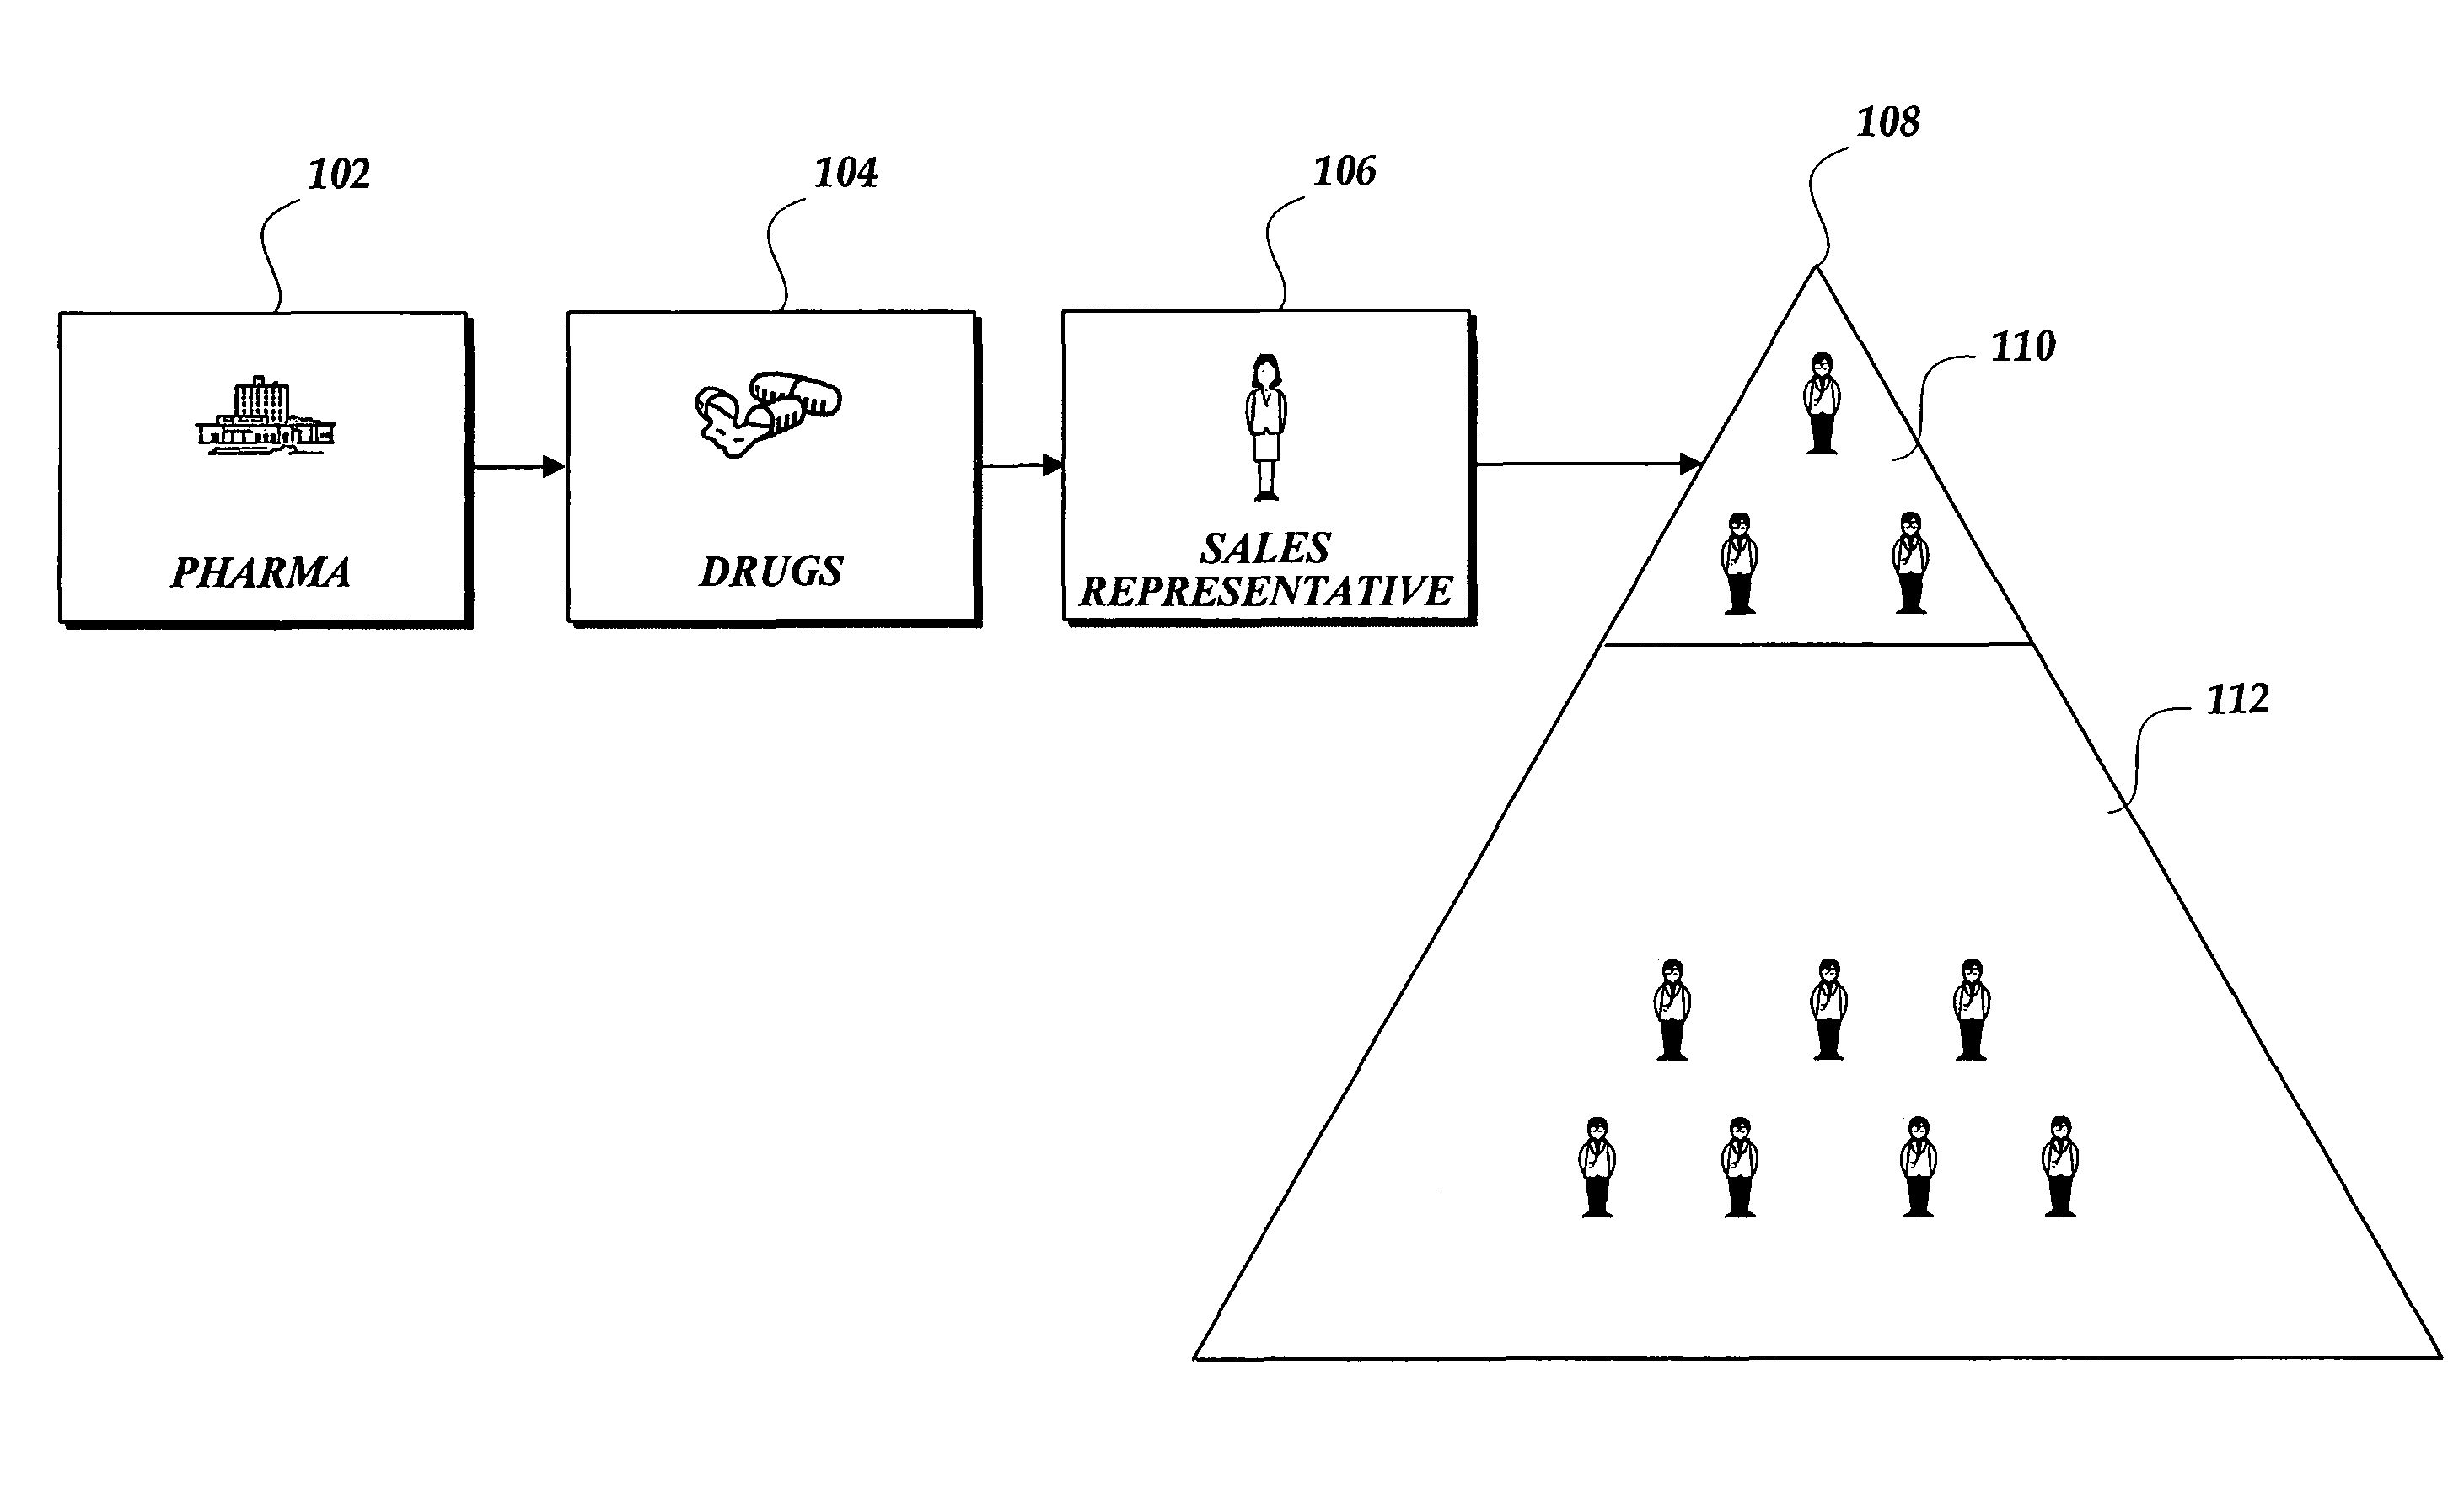 Authenticating prescriber identity to enable electronically ordering drug samples from a drug sample fulfillment platform